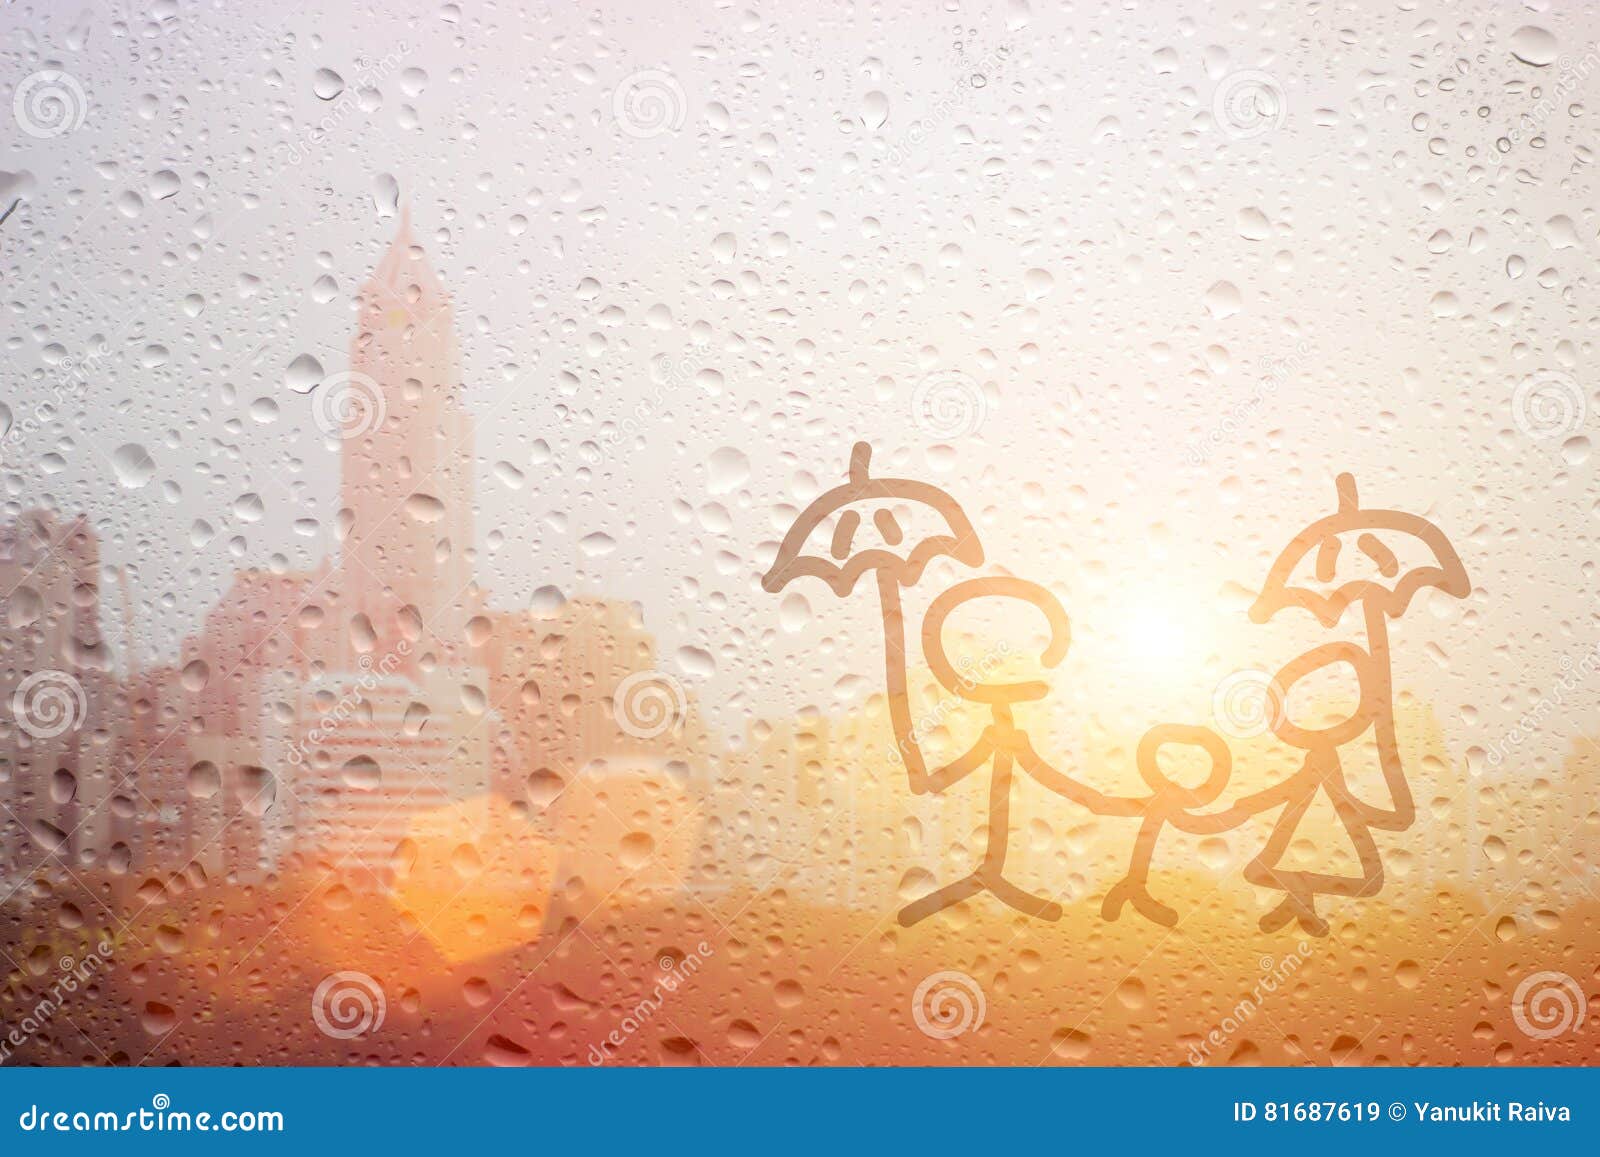 draw family dad mum and child hand with umbrella in the raining